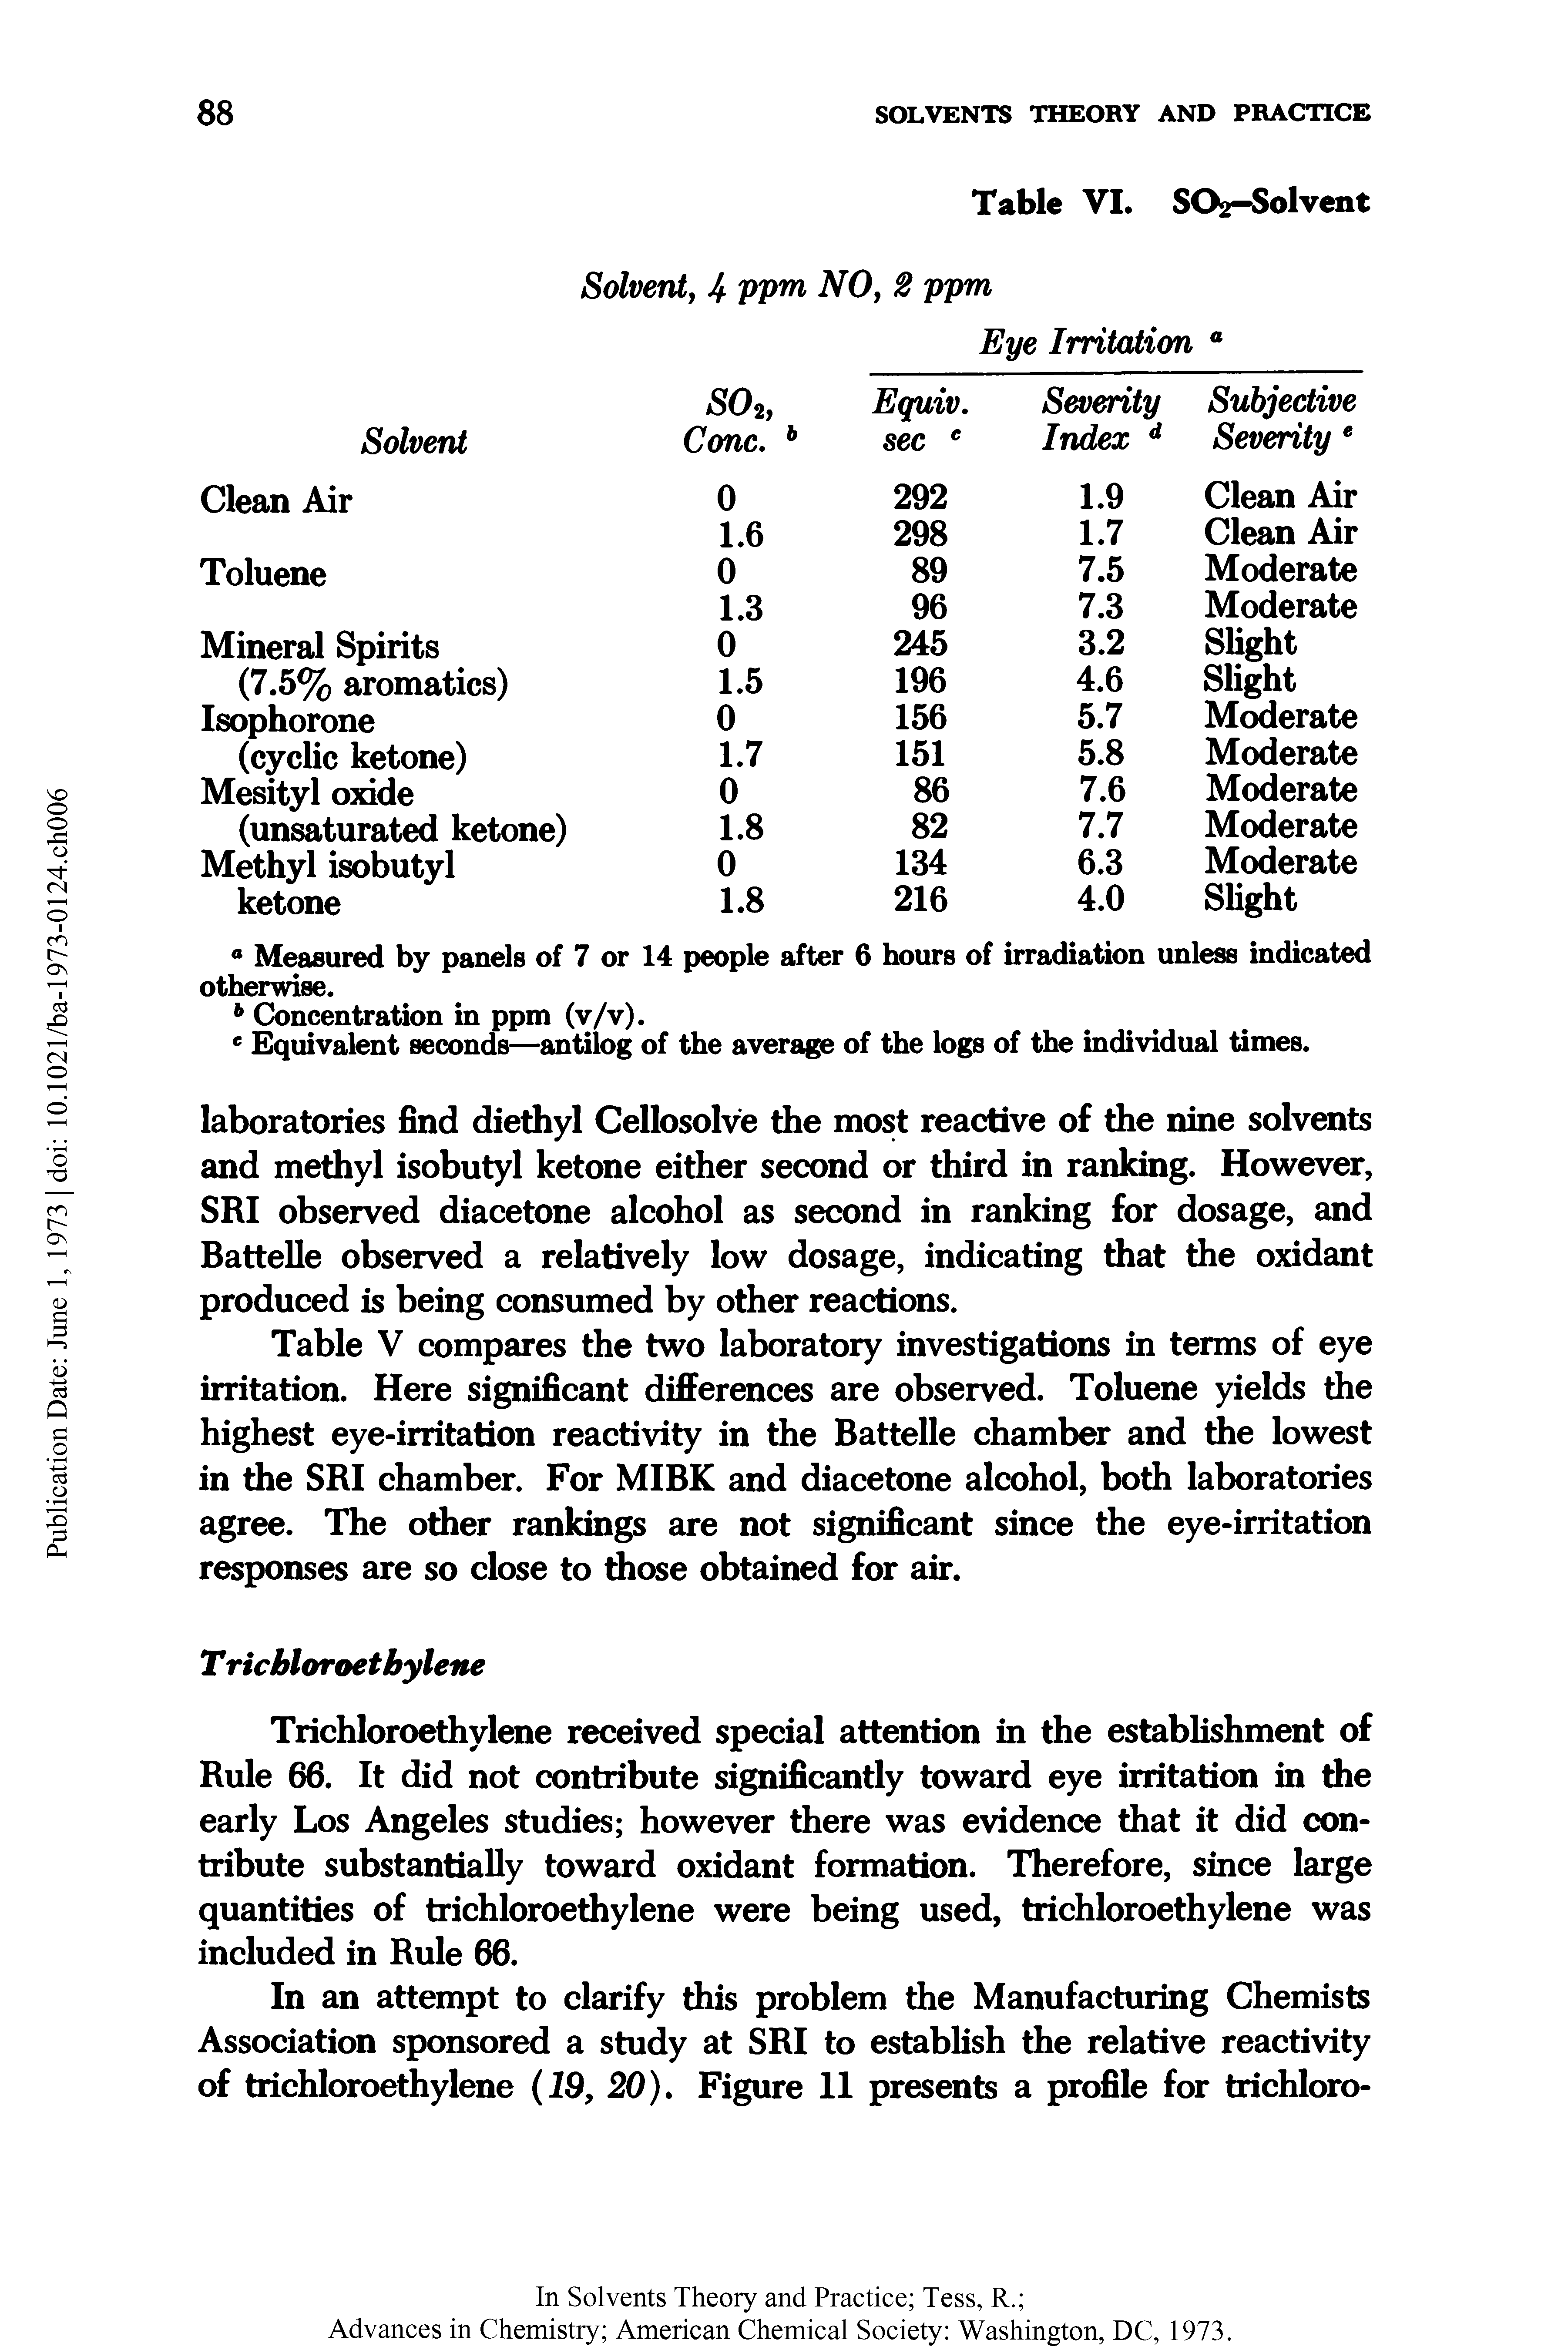 Table V compares the two laboratory investigations in terms of eye irritation. Here significant differences are observed. Toluene yields the highest eye-irritation reactivity in the Battelle chamber and the lowest in the SRI chamber. For MIBK and diacetone alcohol, both laboratories agree. The other rankings are not significant since the eye-irritation responses are so close to those obtained for air.